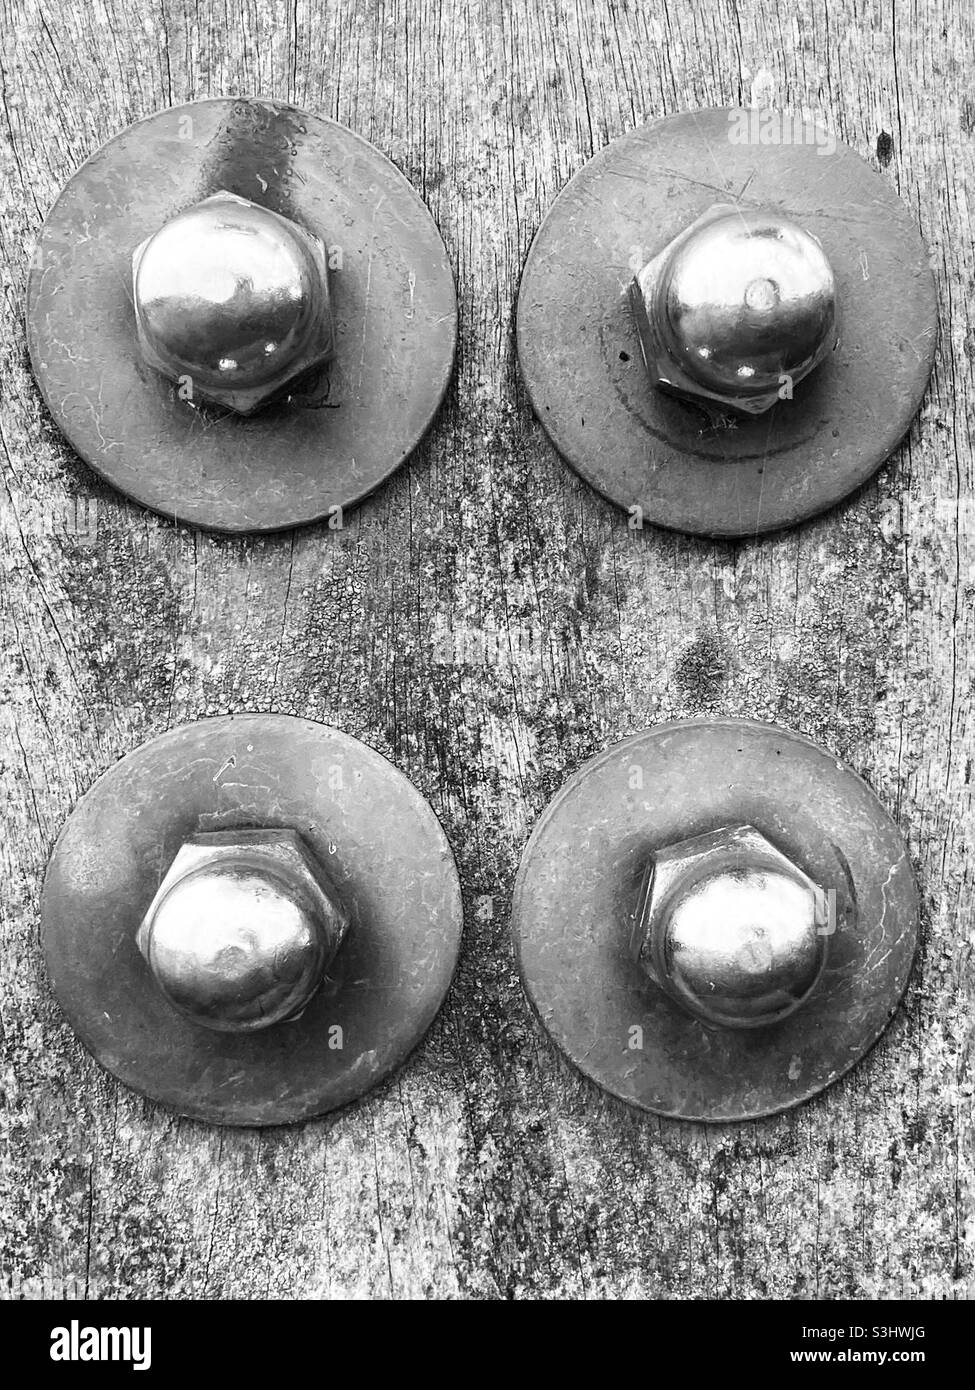 four nuts arranged in a square on a weathered wooden beam Stock Photo